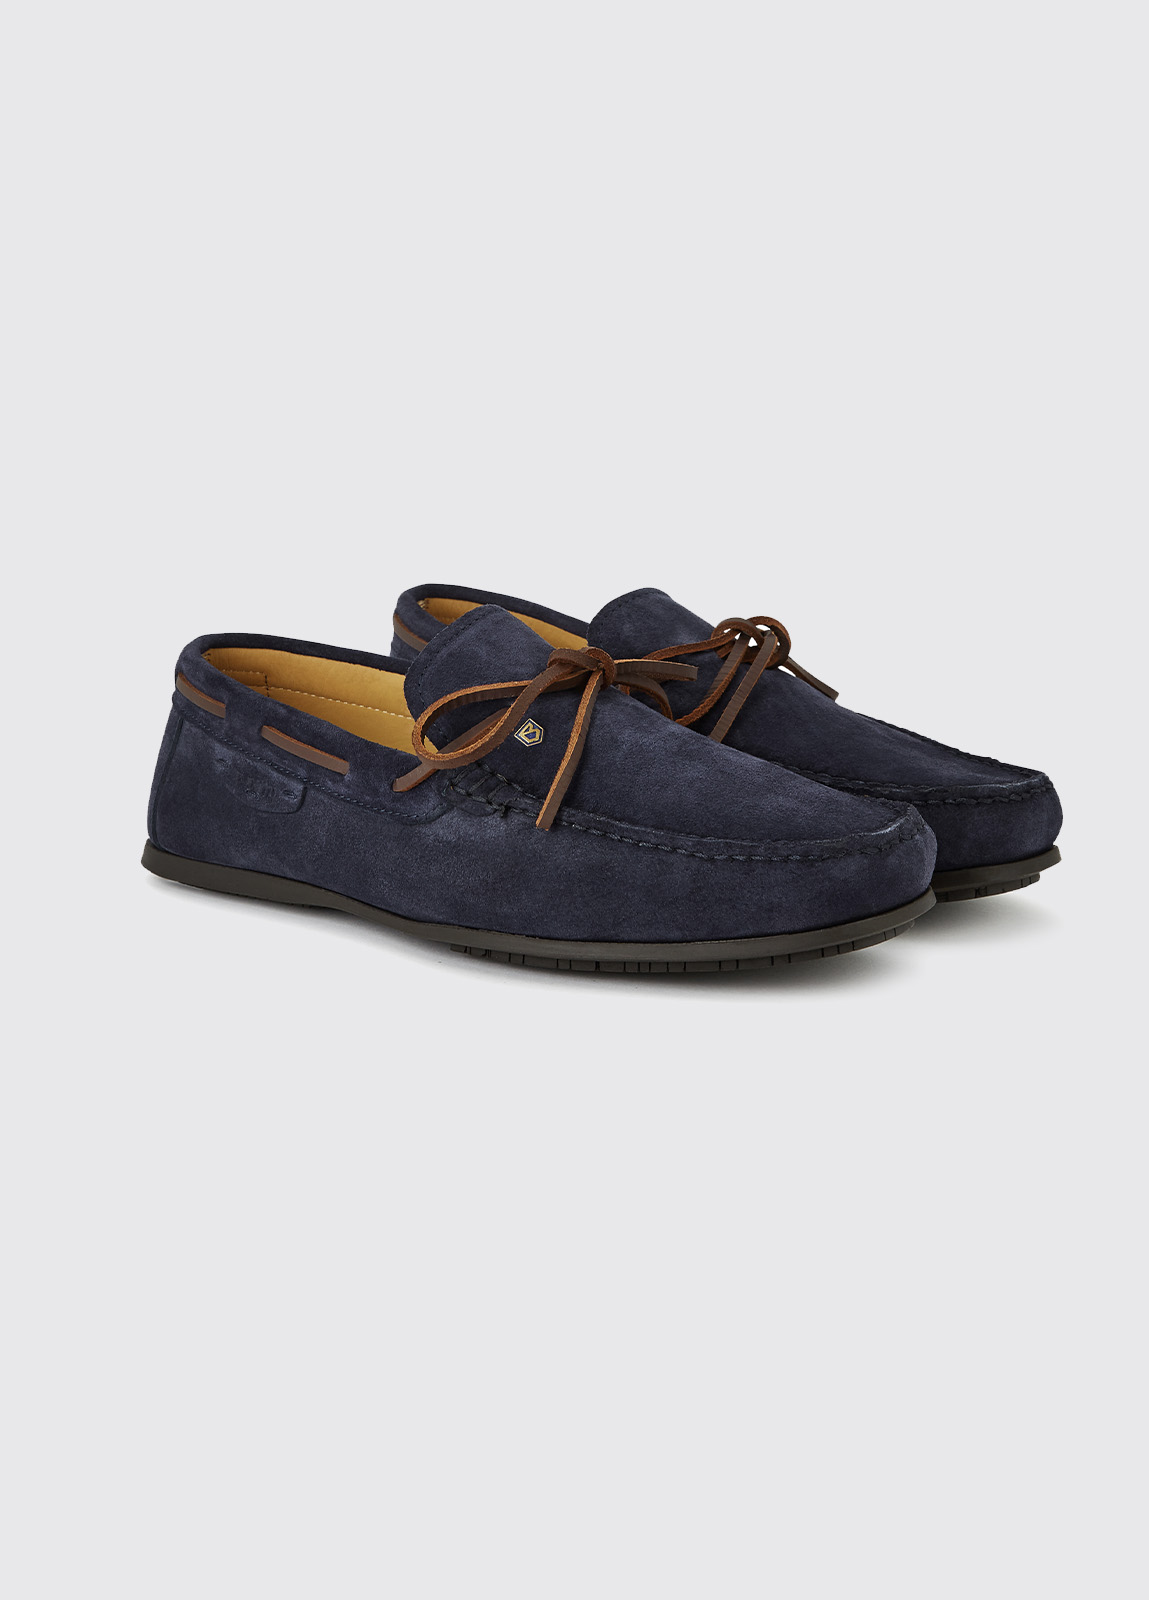 Shearwater Loafer - French Navy